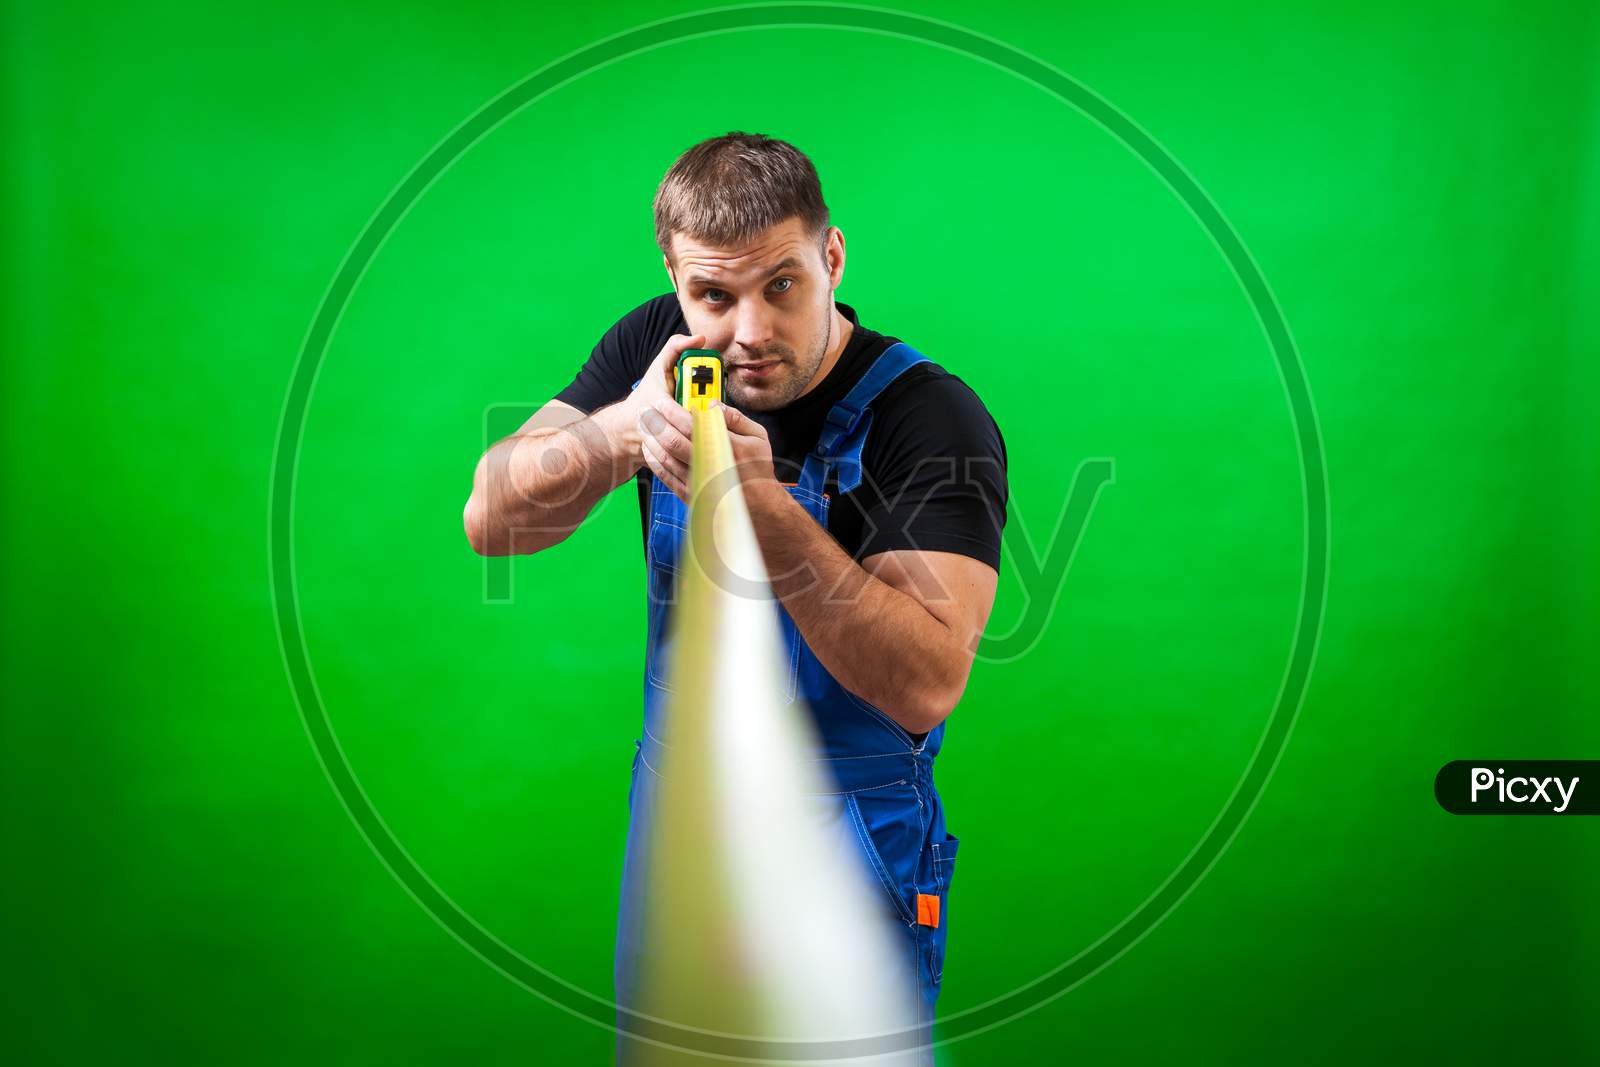 A Close-Up Of The Tape Rule. A Young Man Carpenter In A Black T-Shirt And Blue Construction Jumpsuit Measures The Length Of A Long Yellow Tape Rule For Construction Work On A Green Isolated Background